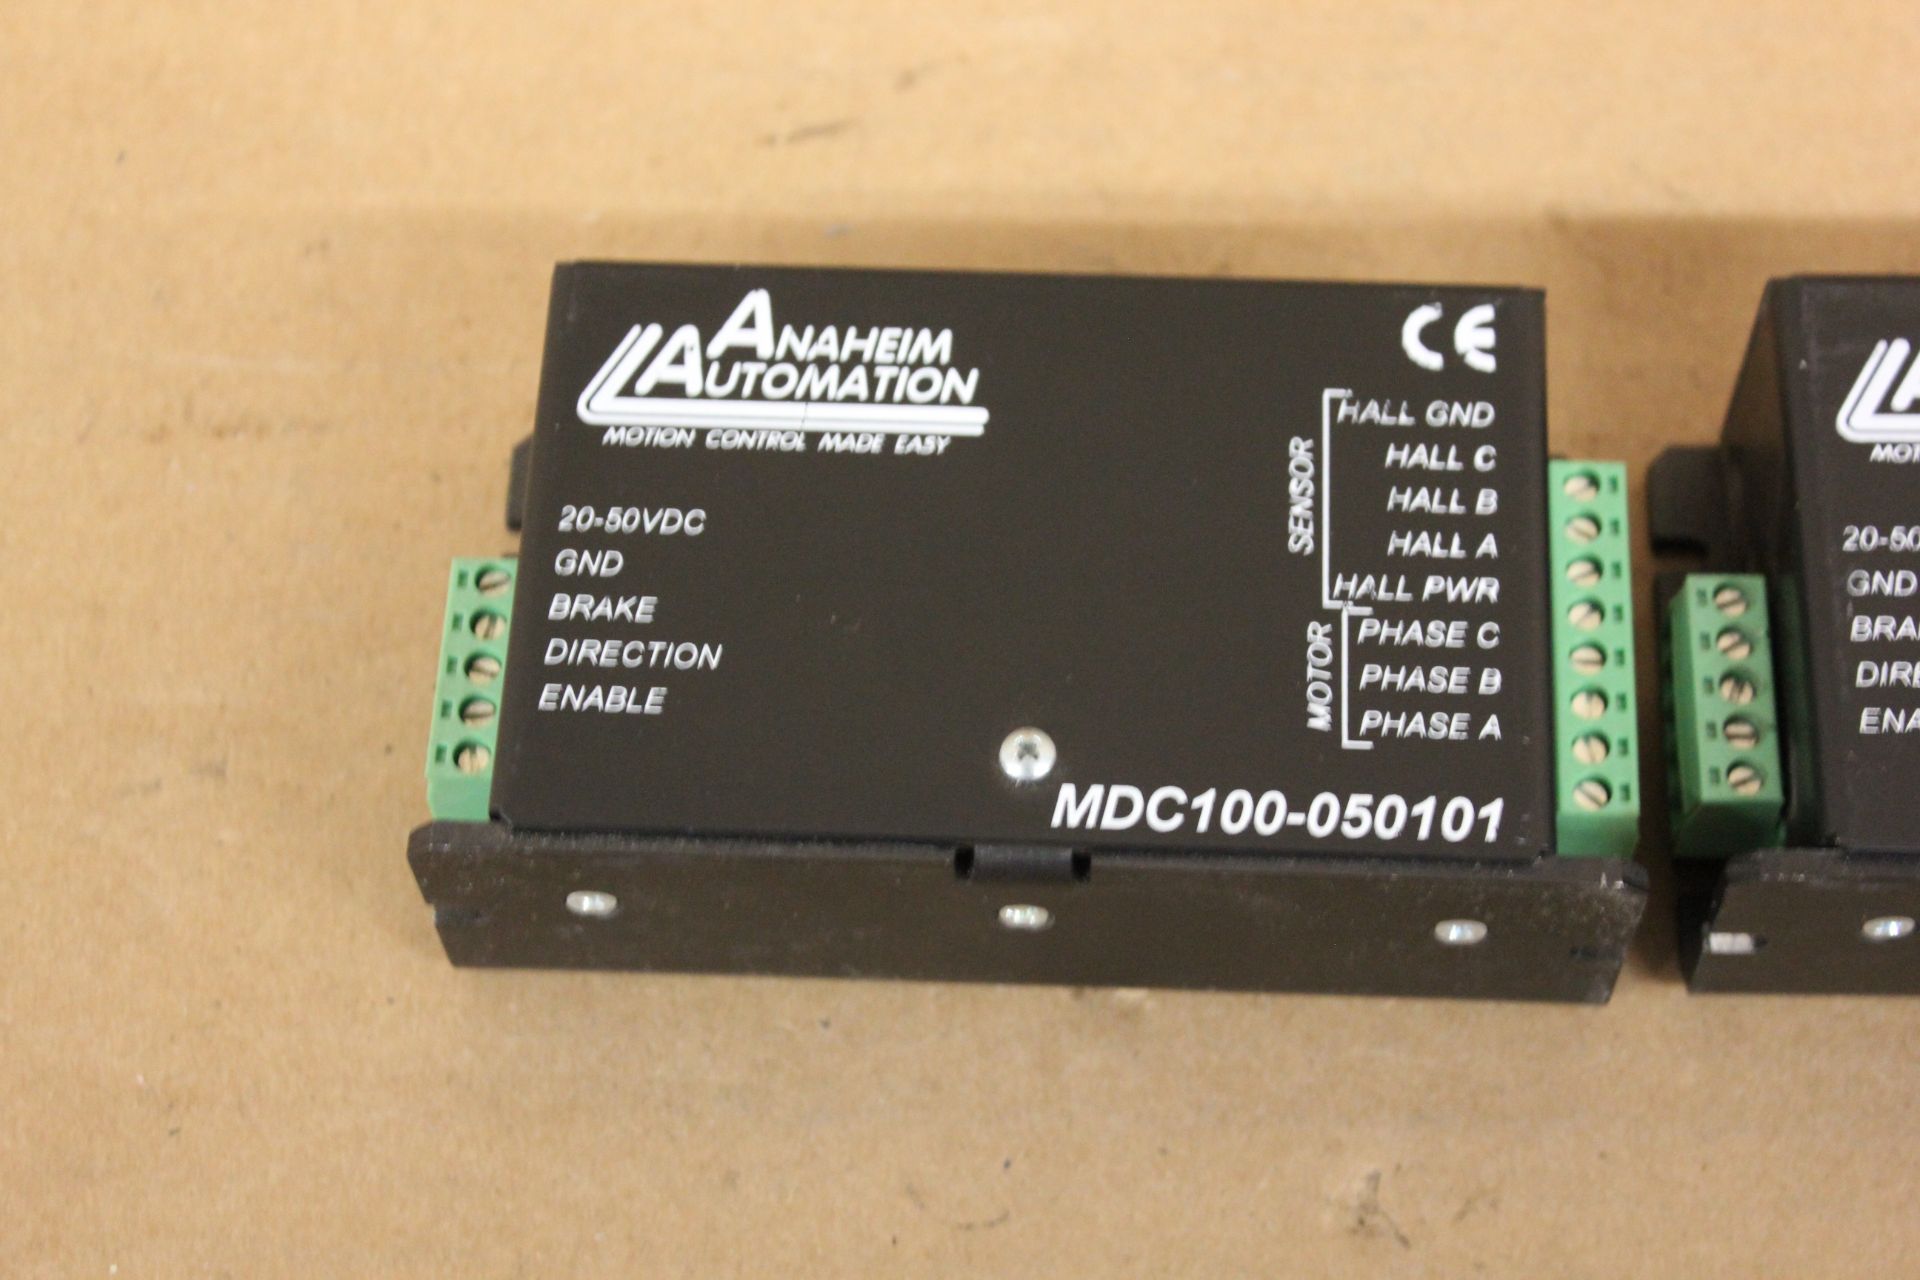 LOT OF ANAHEIM AUTOMATION BRUSHLESS DC MOTOR DRIVE SPEED CONTROLLER - Image 2 of 5